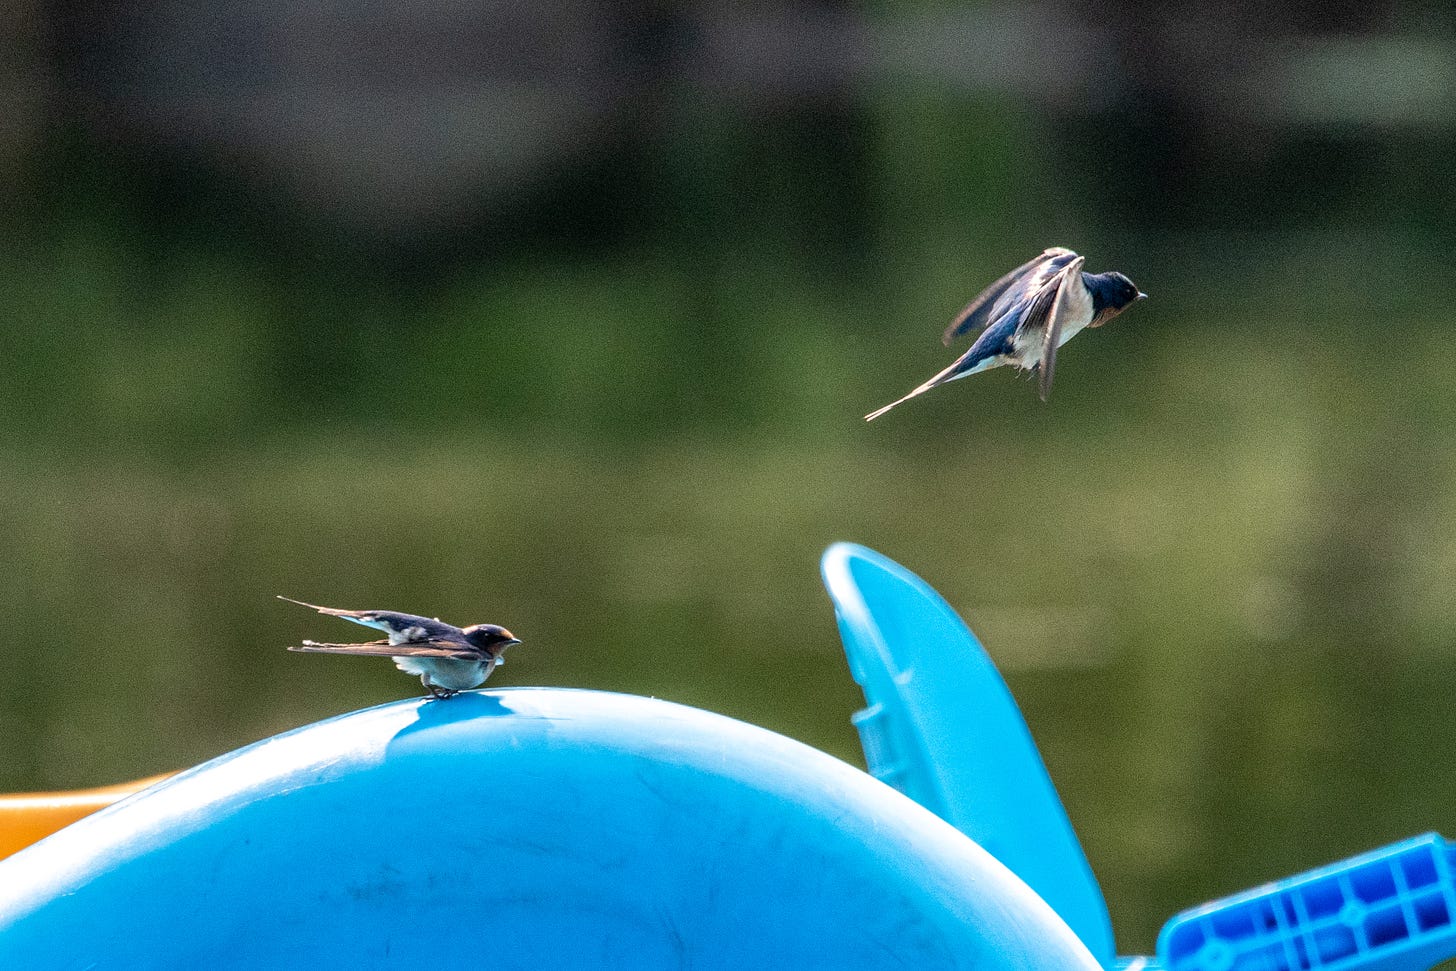 Two barn swallows, which have blue and orange in their coloration, flirting on and above blue and orange plastic paddleboats parked on the lake